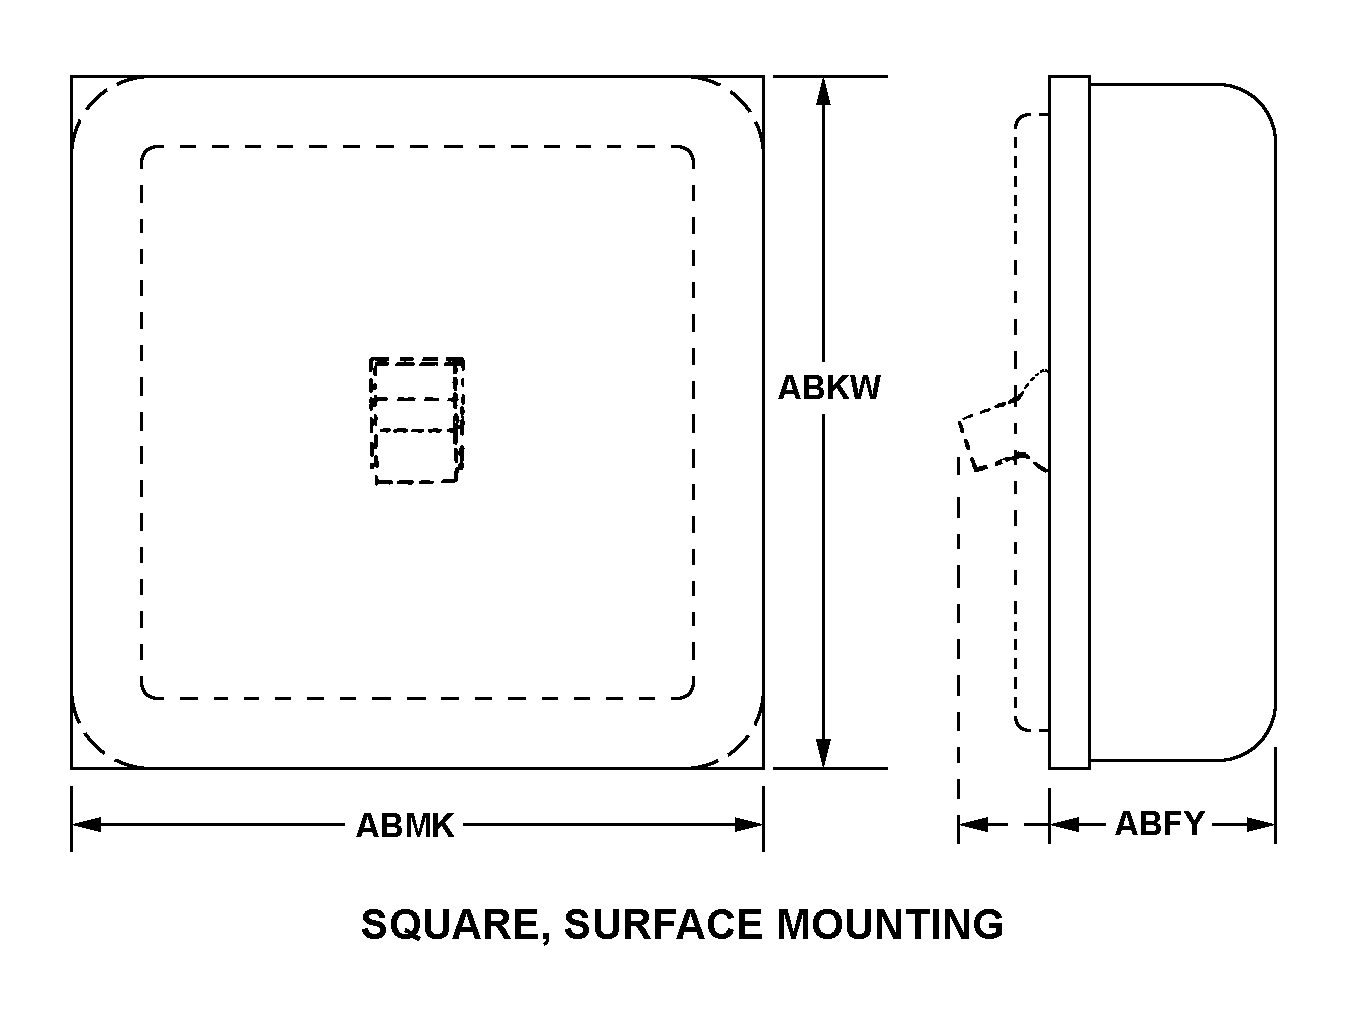 SQUARE, SURFACE MOUNTING style nsn 6110-01-207-1269